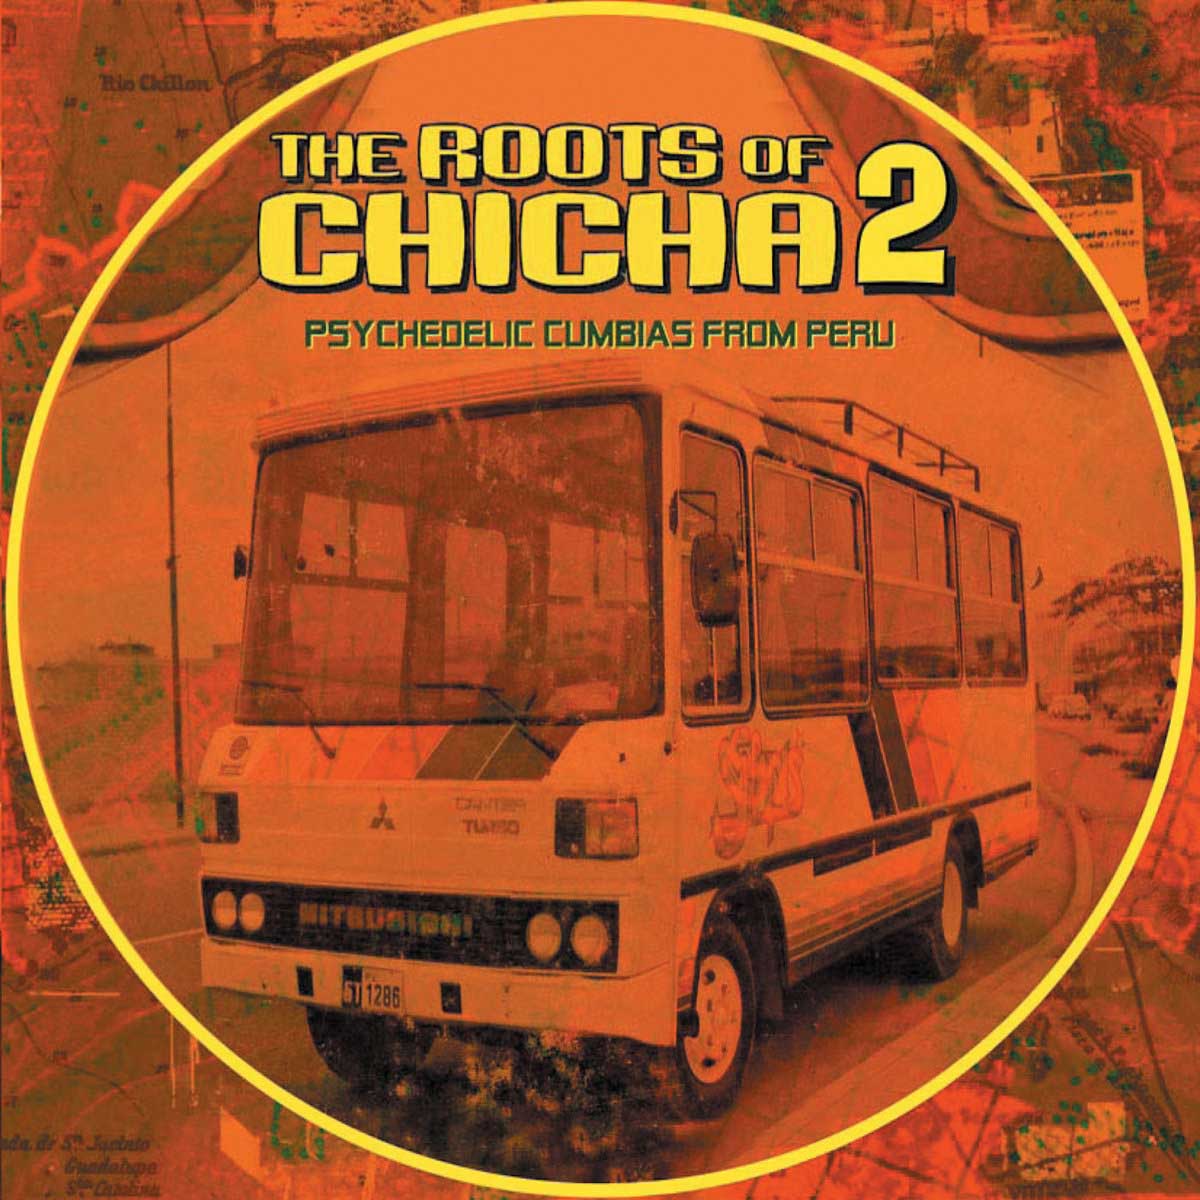 Orange and yellow album cover for The Roots of Chicha 2. 